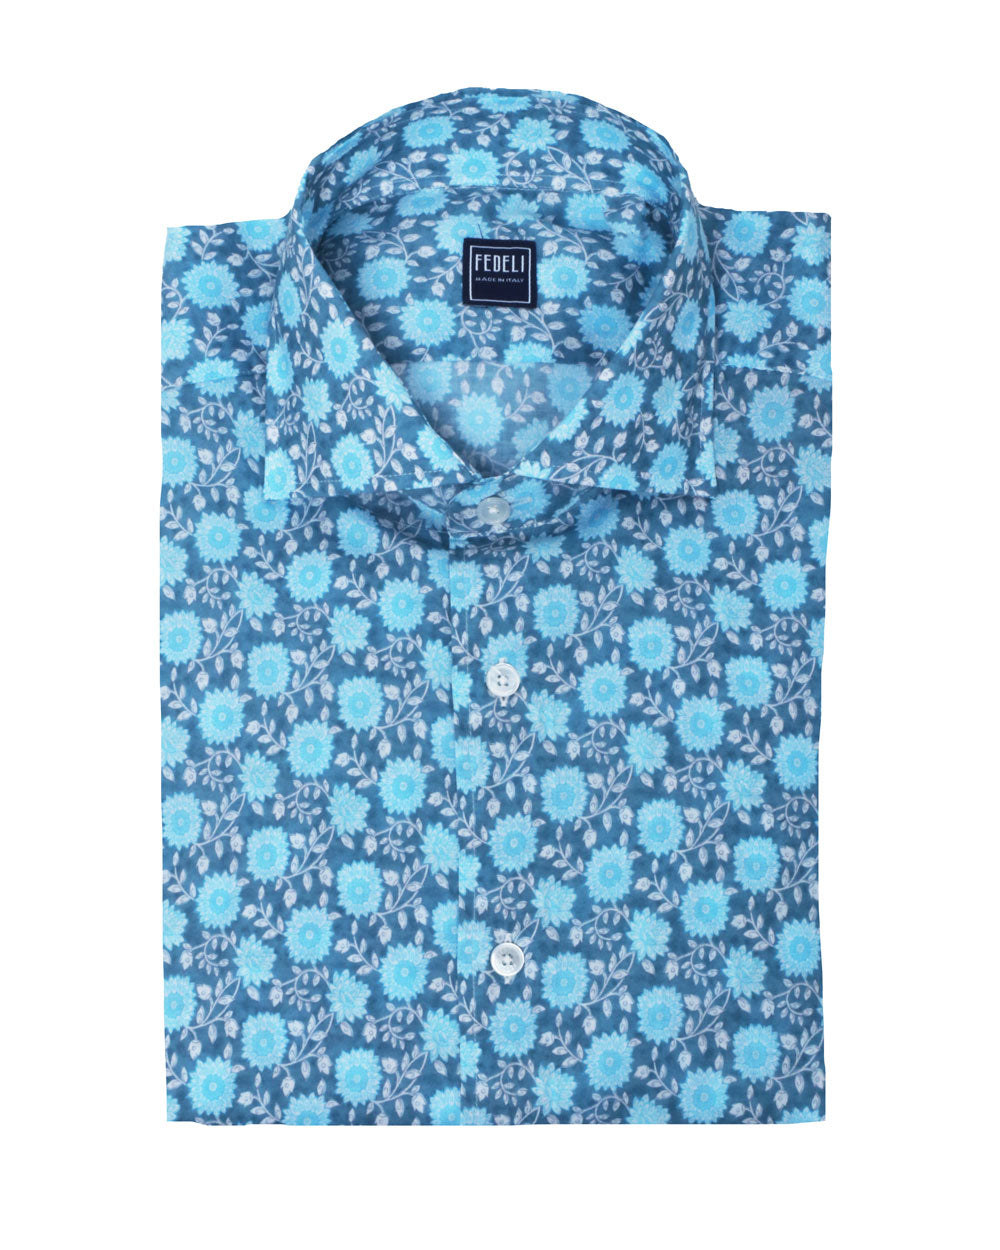 Blue and White Multi Floral Dress Shirt